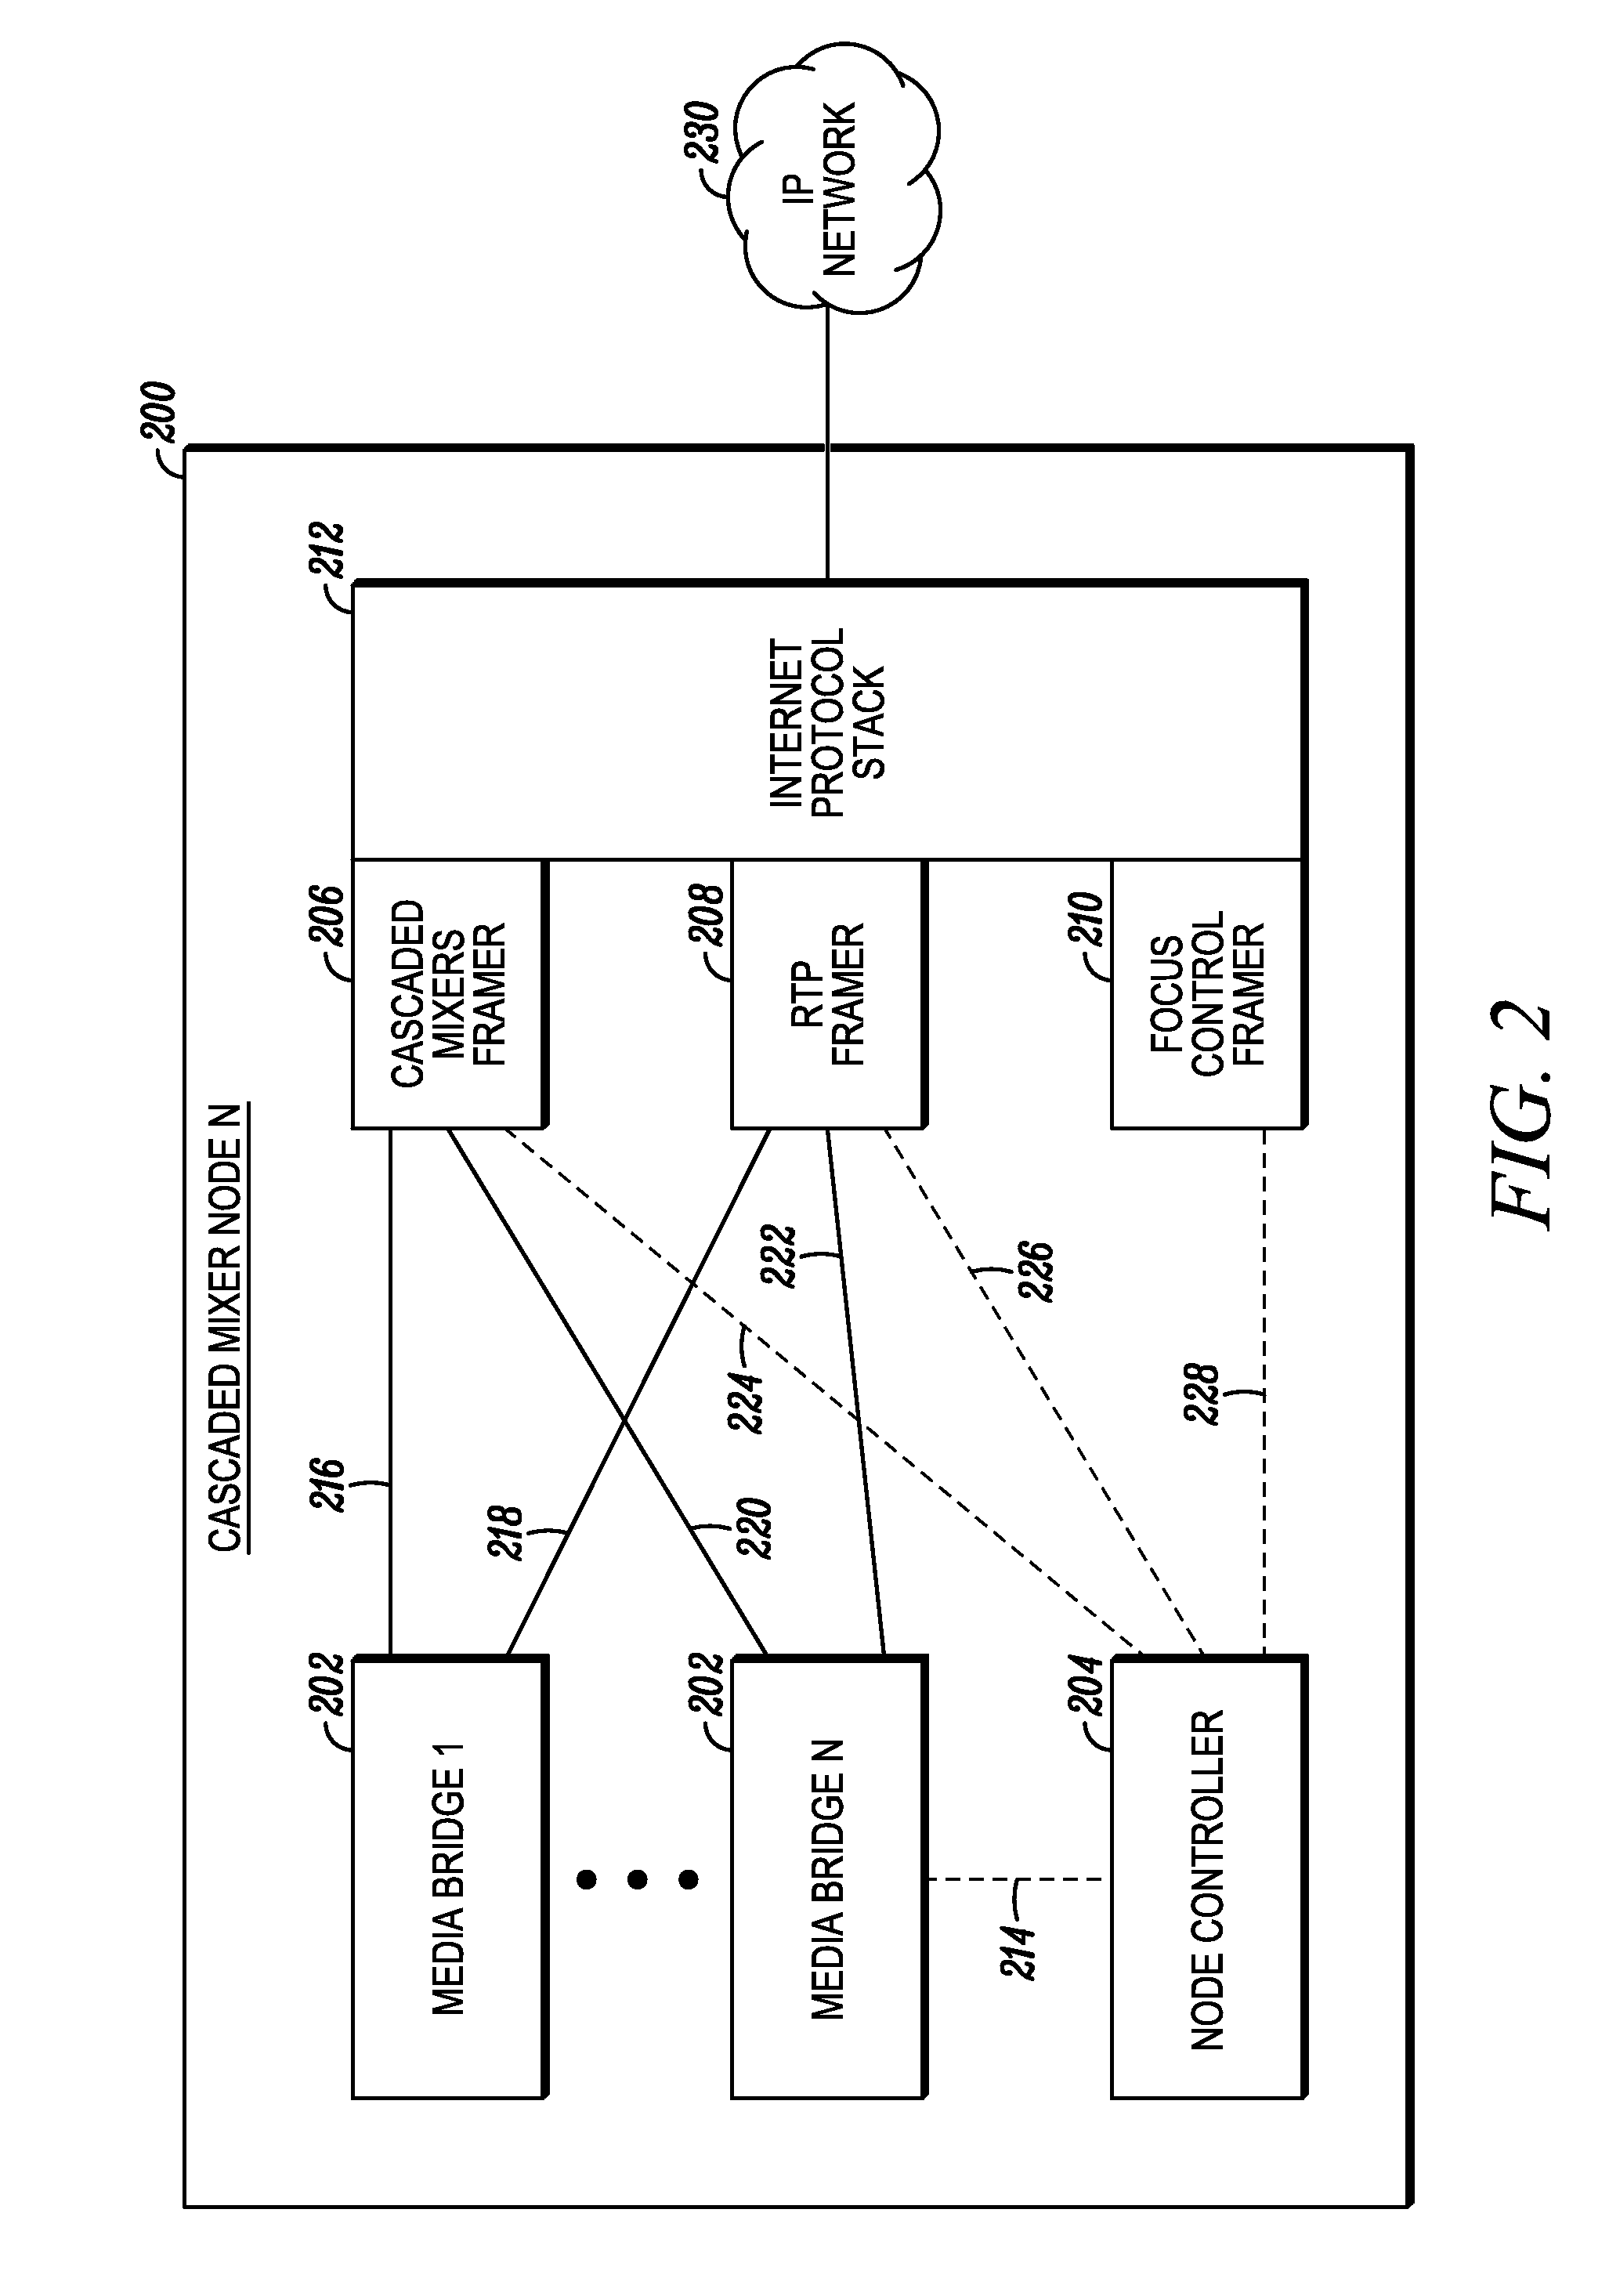 Decoupled cascaded mixers architechture and related methods